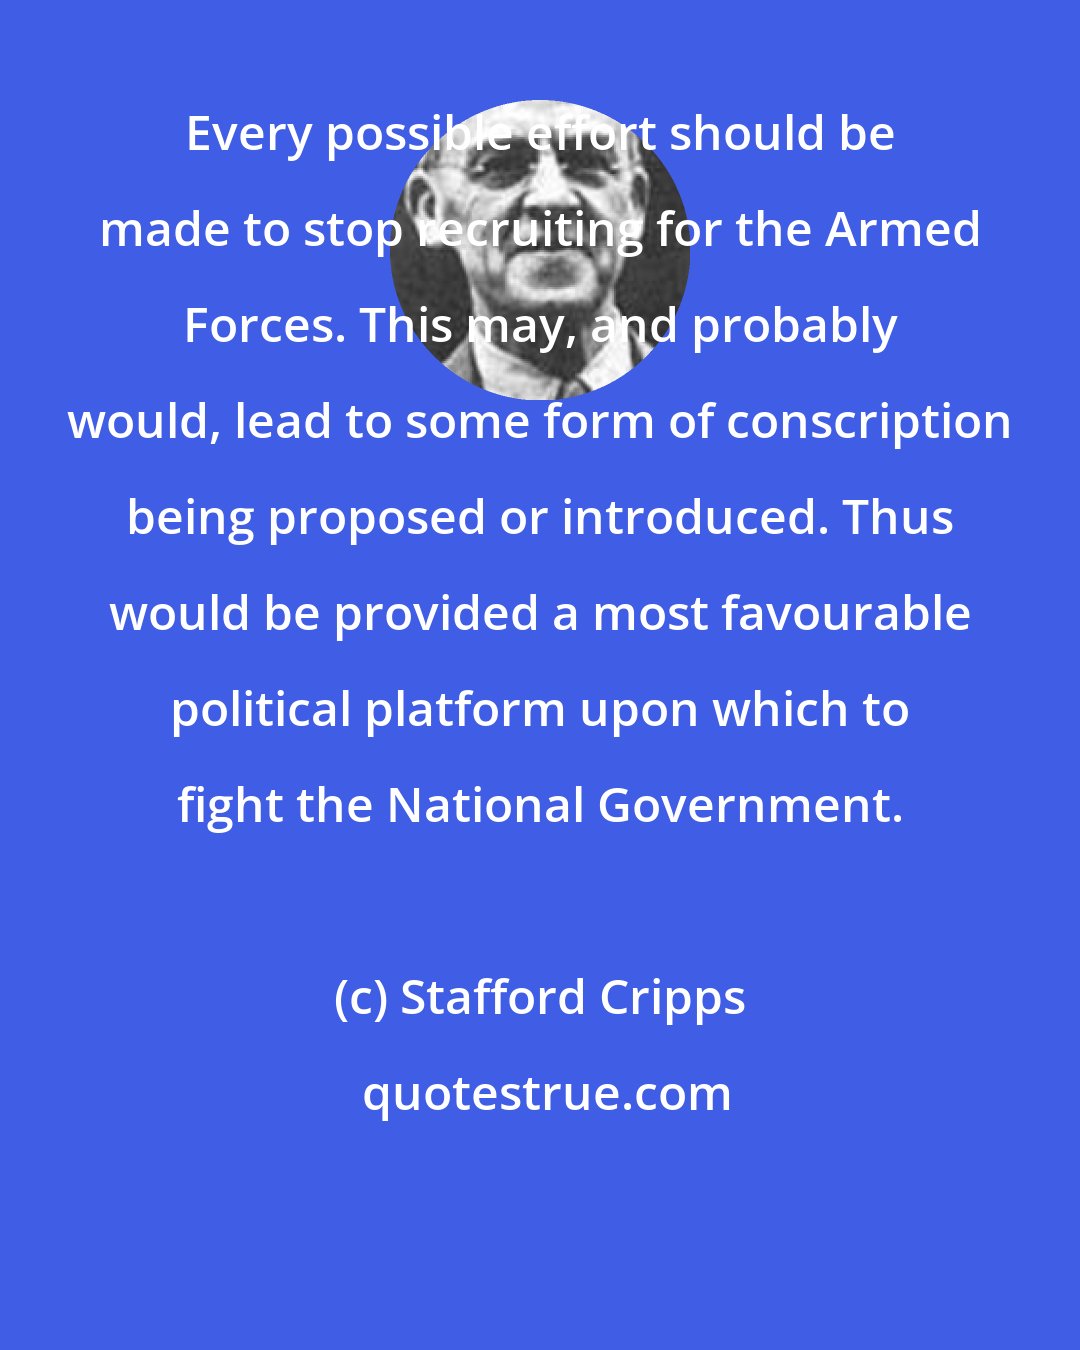 Stafford Cripps: Every possible effort should be made to stop recruiting for the Armed Forces. This may, and probably would, lead to some form of conscription being proposed or introduced. Thus would be provided a most favourable political platform upon which to fight the National Government.